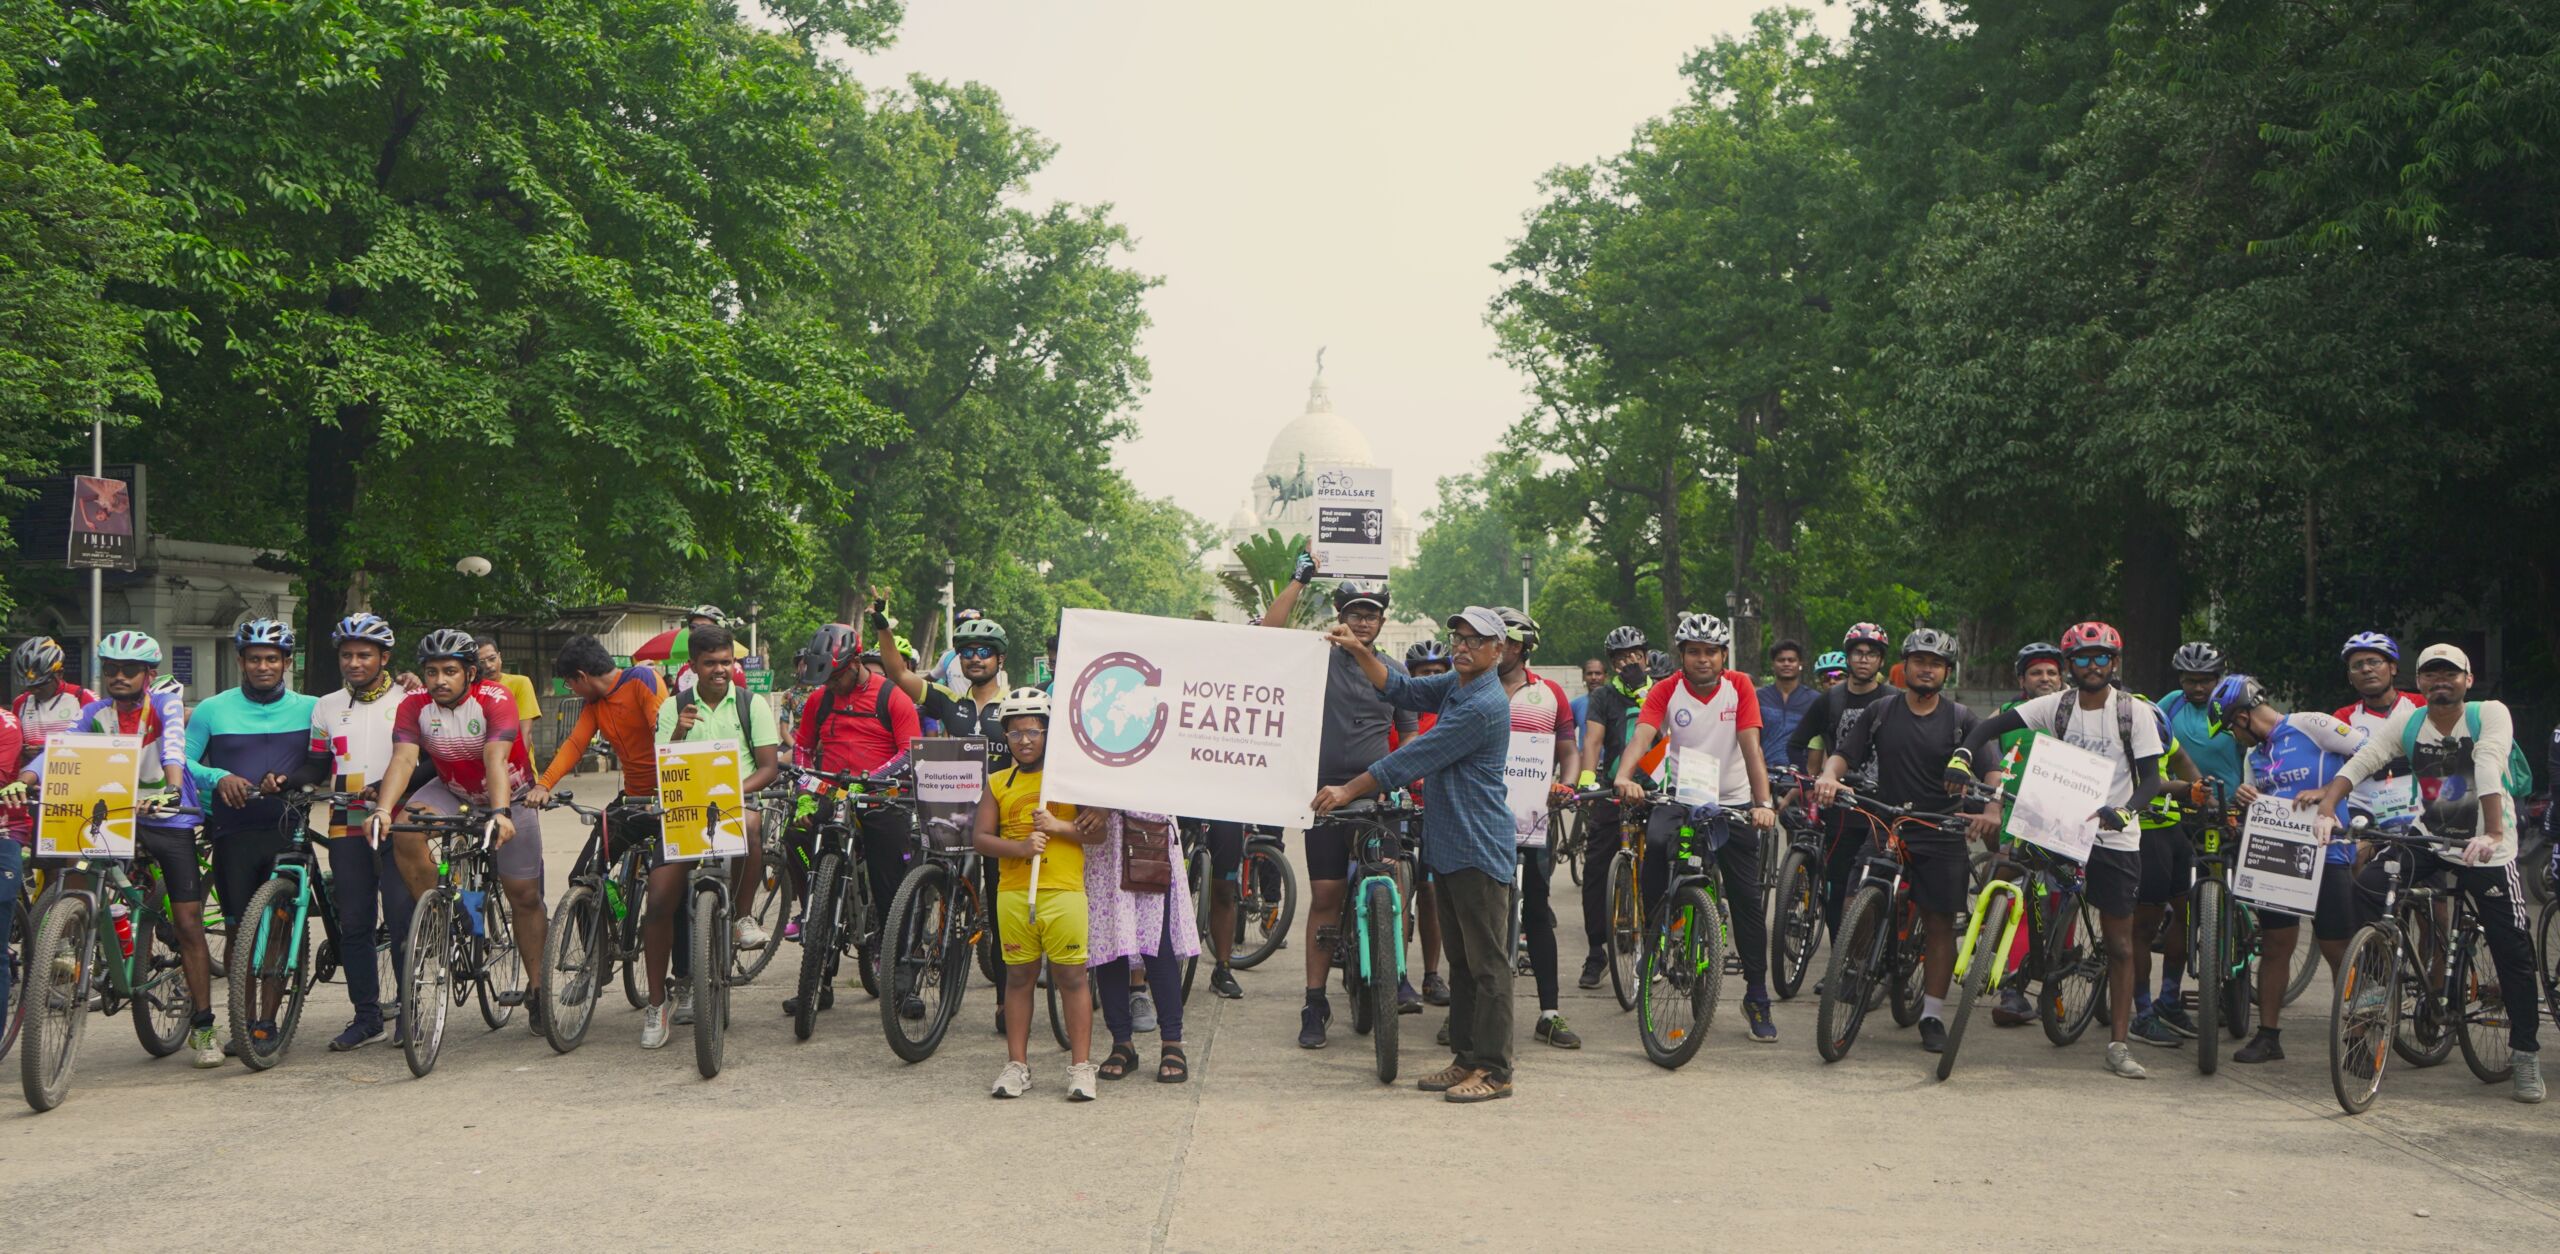 Move for Earth Global Cycling Crusade urging urgent Climate Action